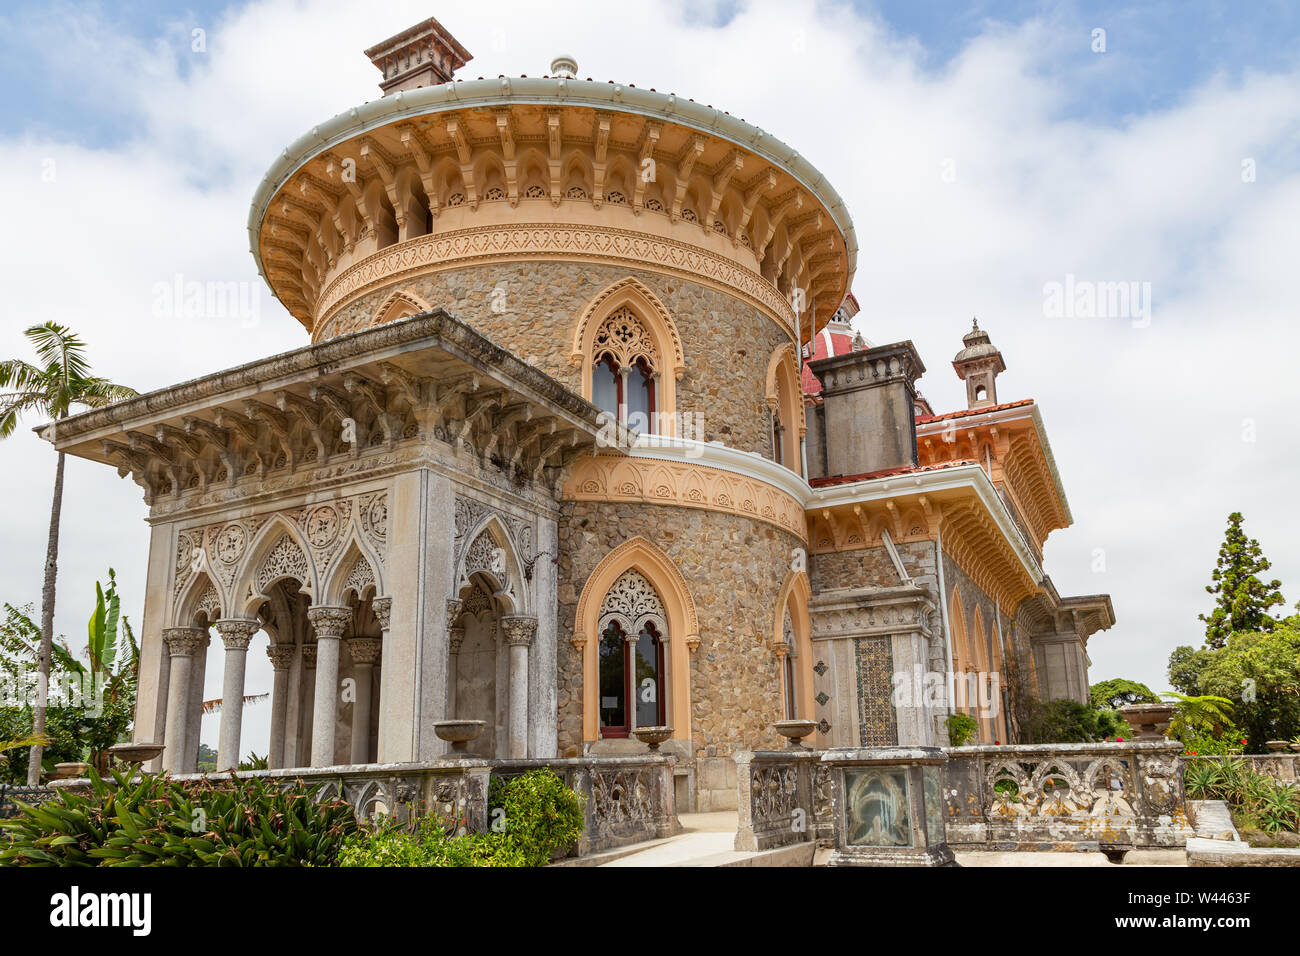 Palace Monserrat in Sintra, Portugal. details of the building with exquisite Moorish architecture Stock Photo